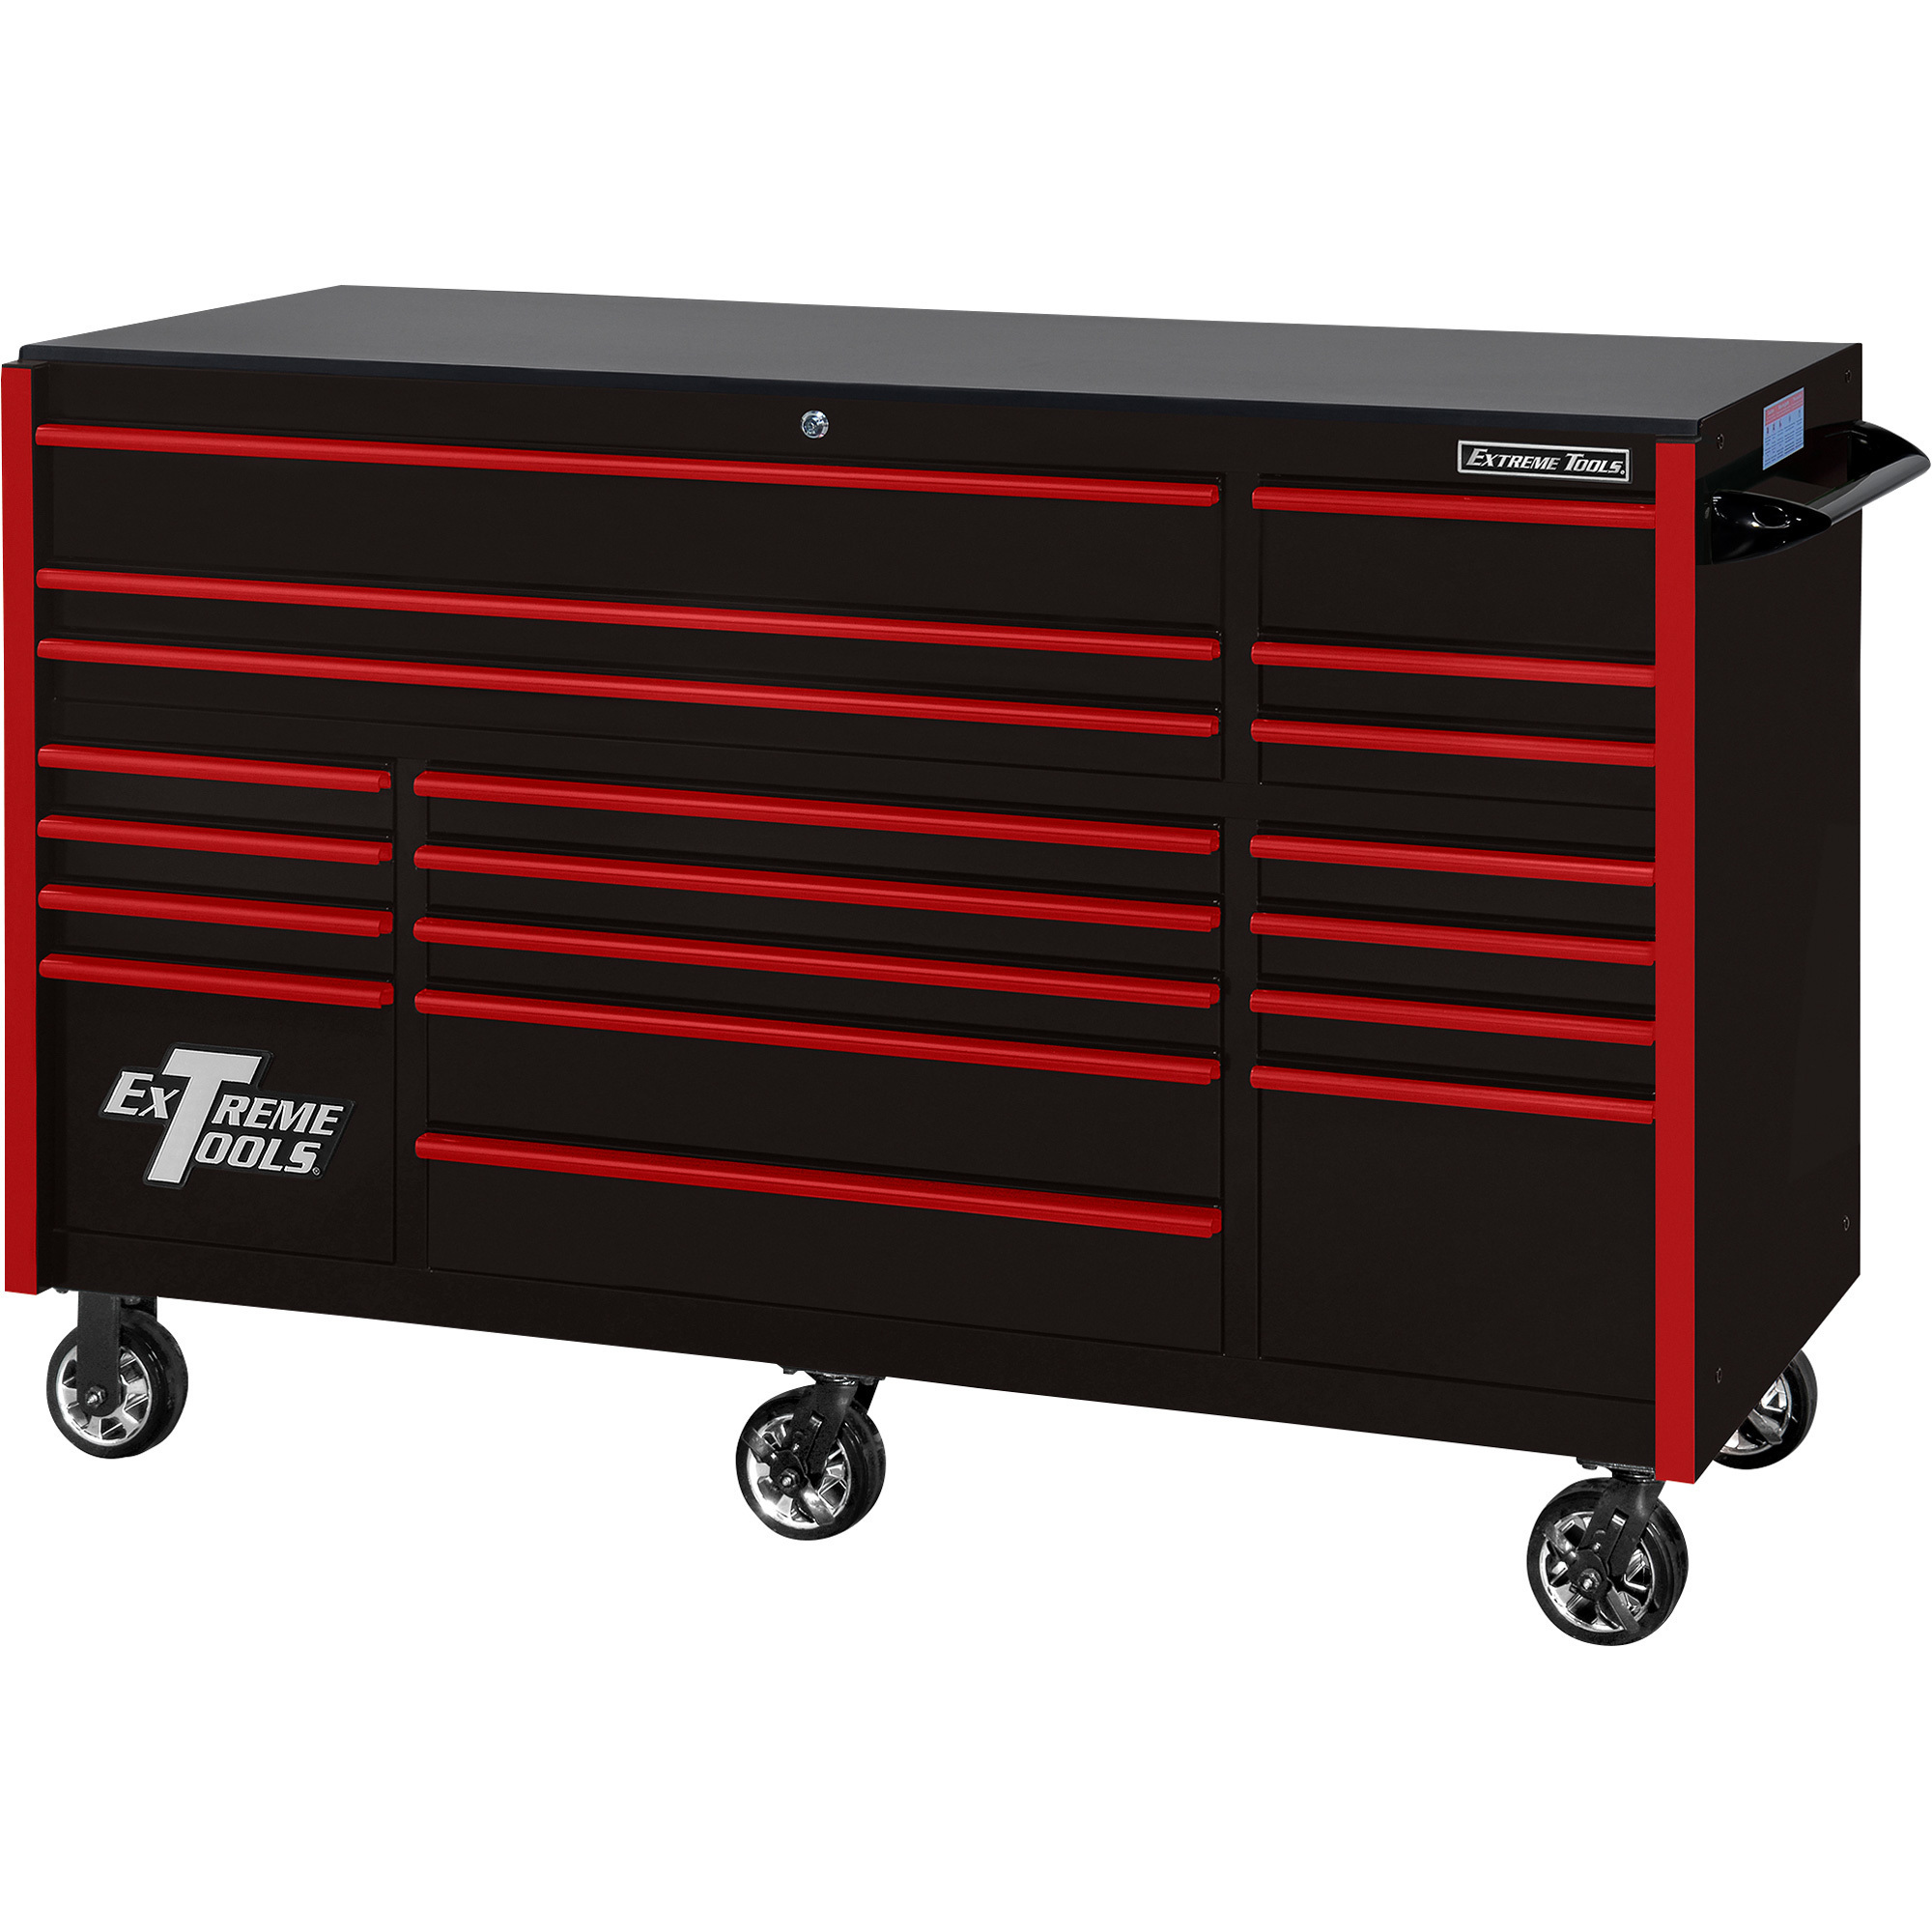 Extreme Tools RX Series 72Inch L x 30Inch W 19 Drawer Tool Roller Cabinet — Black with Red Drawer Pulls, 72Inch W x 30Inch D x 47Inch H, Model -  RX723019RCBKRD-250